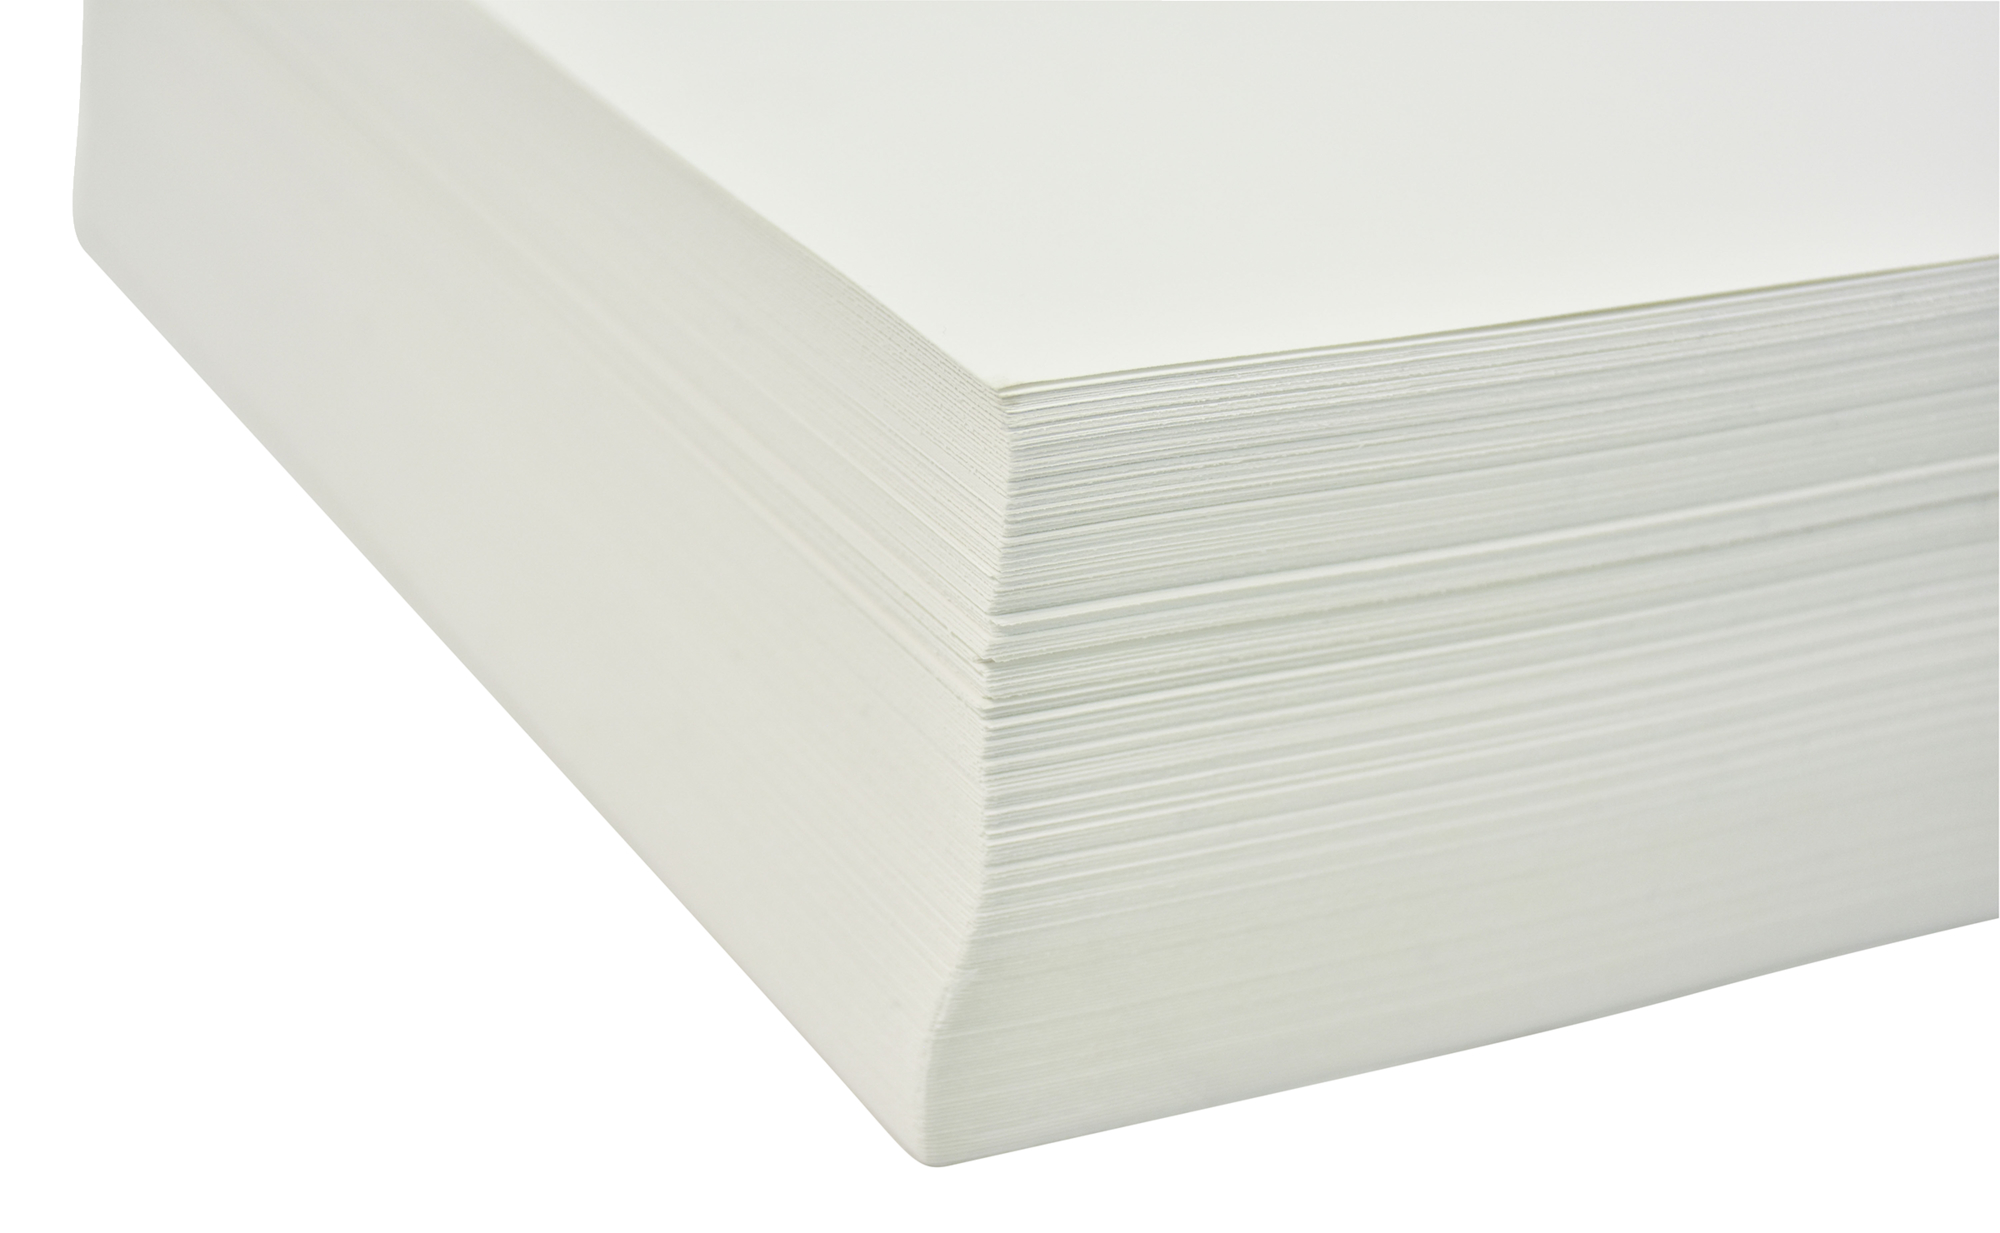 Sax Sulphite Drawing Paper, 80 lb, 18 x 24 Inches, Extra-White, Pack